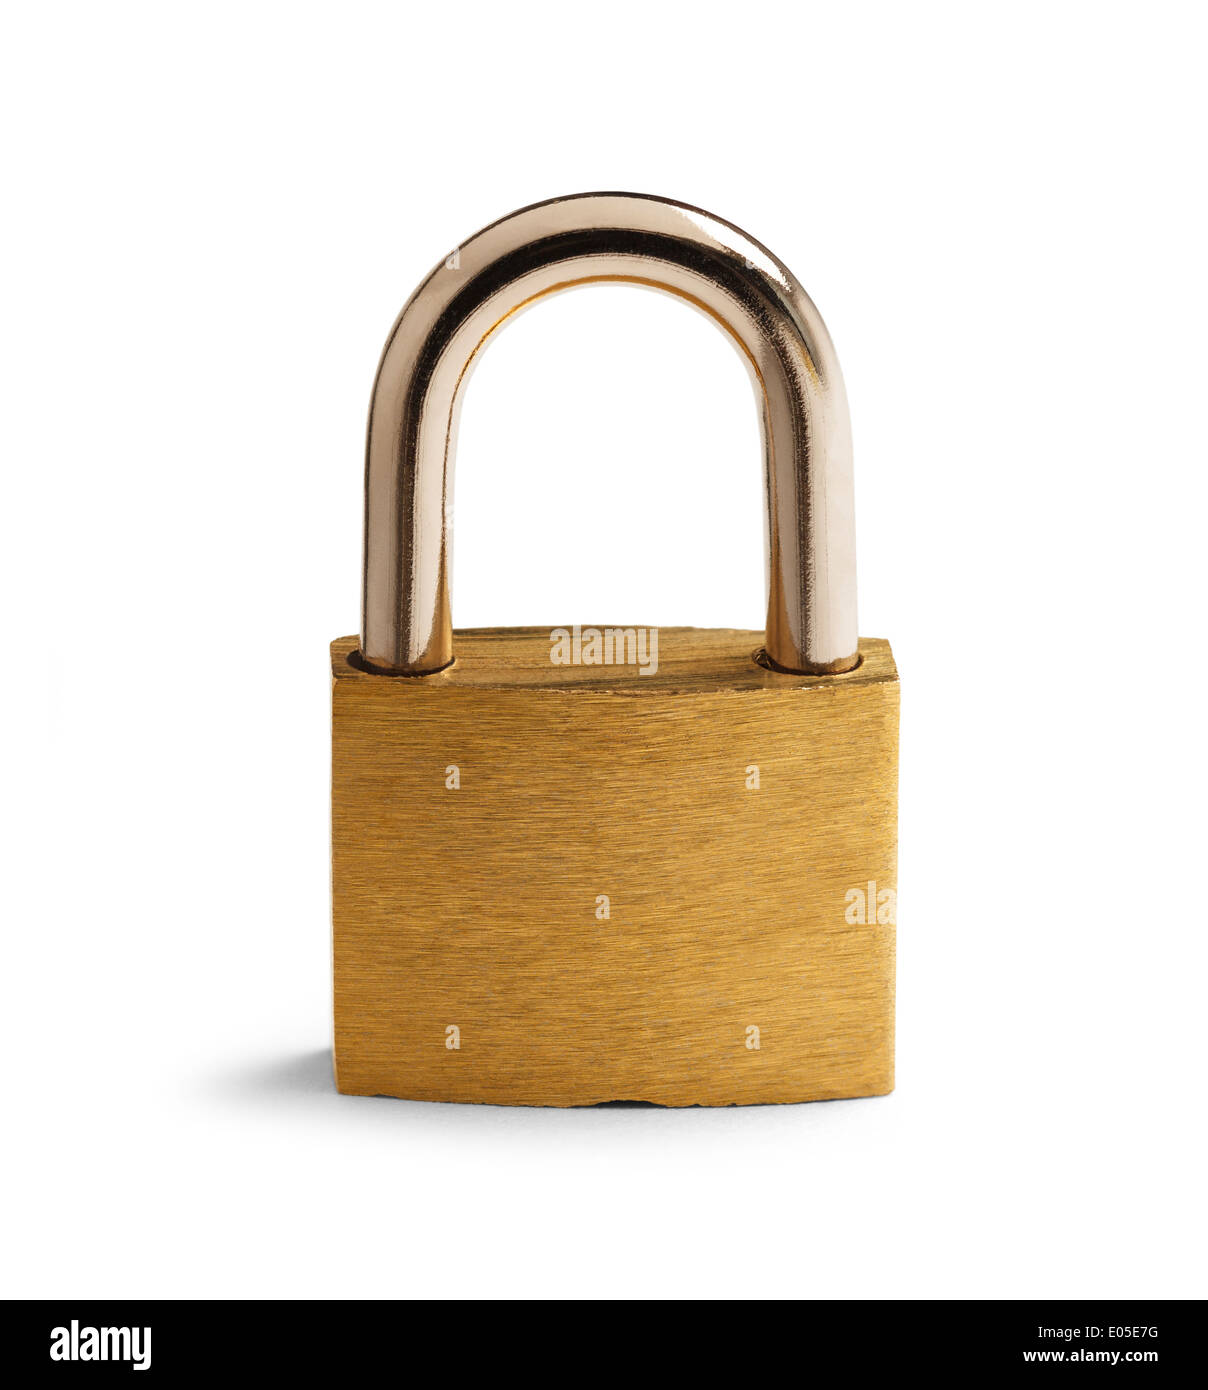 Brass Padlock Closed and Locked with Copy space Isolated on White Background. Stock Photo